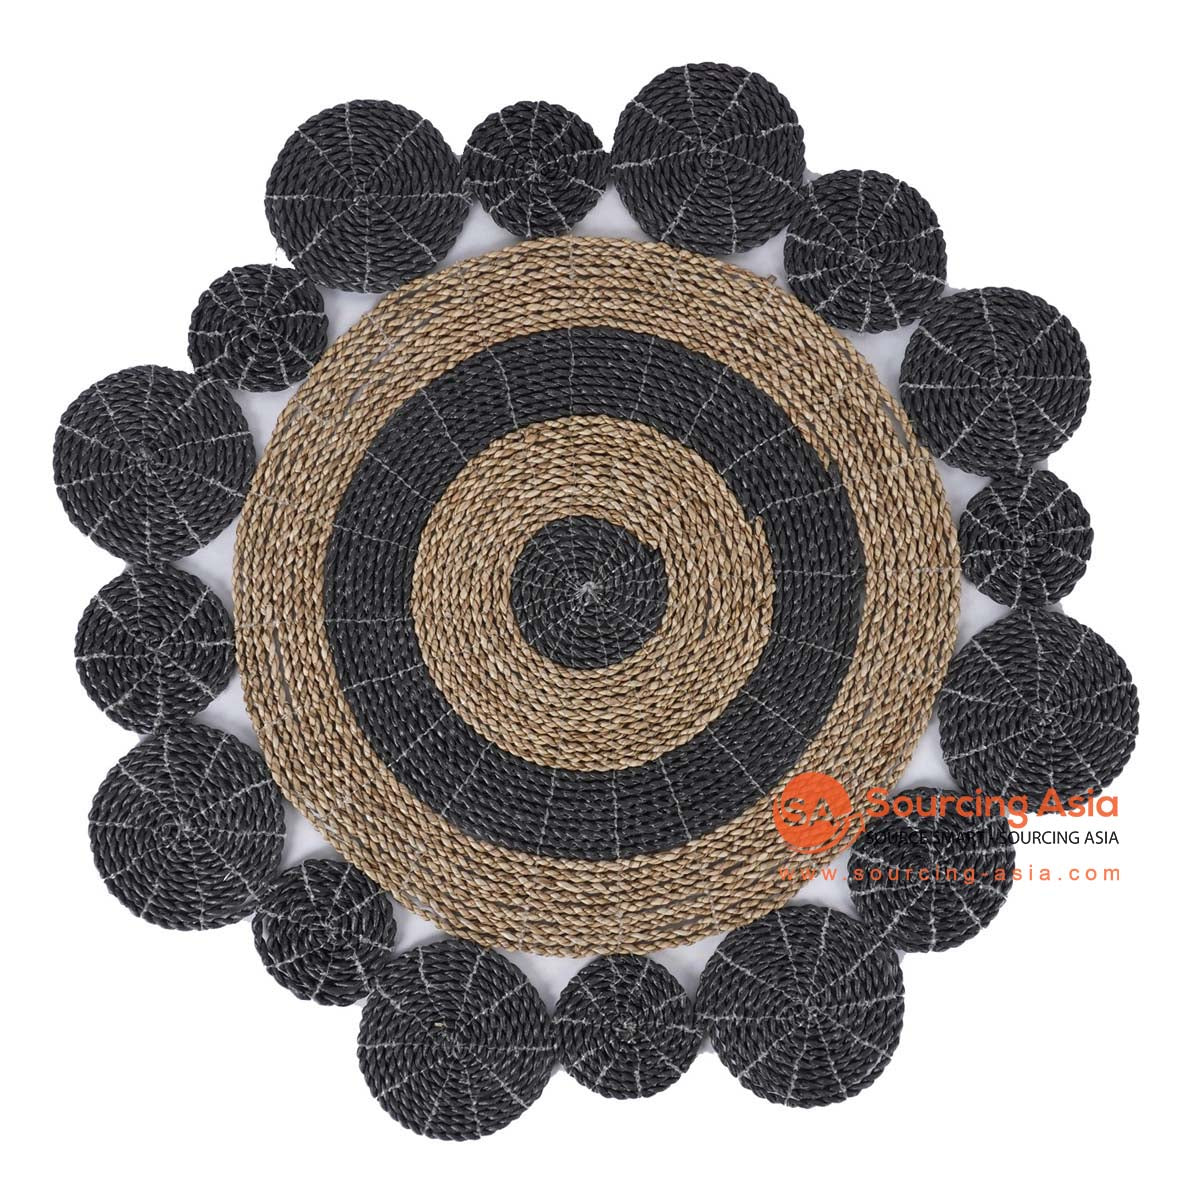 HBSC358 NATURAL AND BLACK SEAGRASS DECORATIVE ROUND RUG